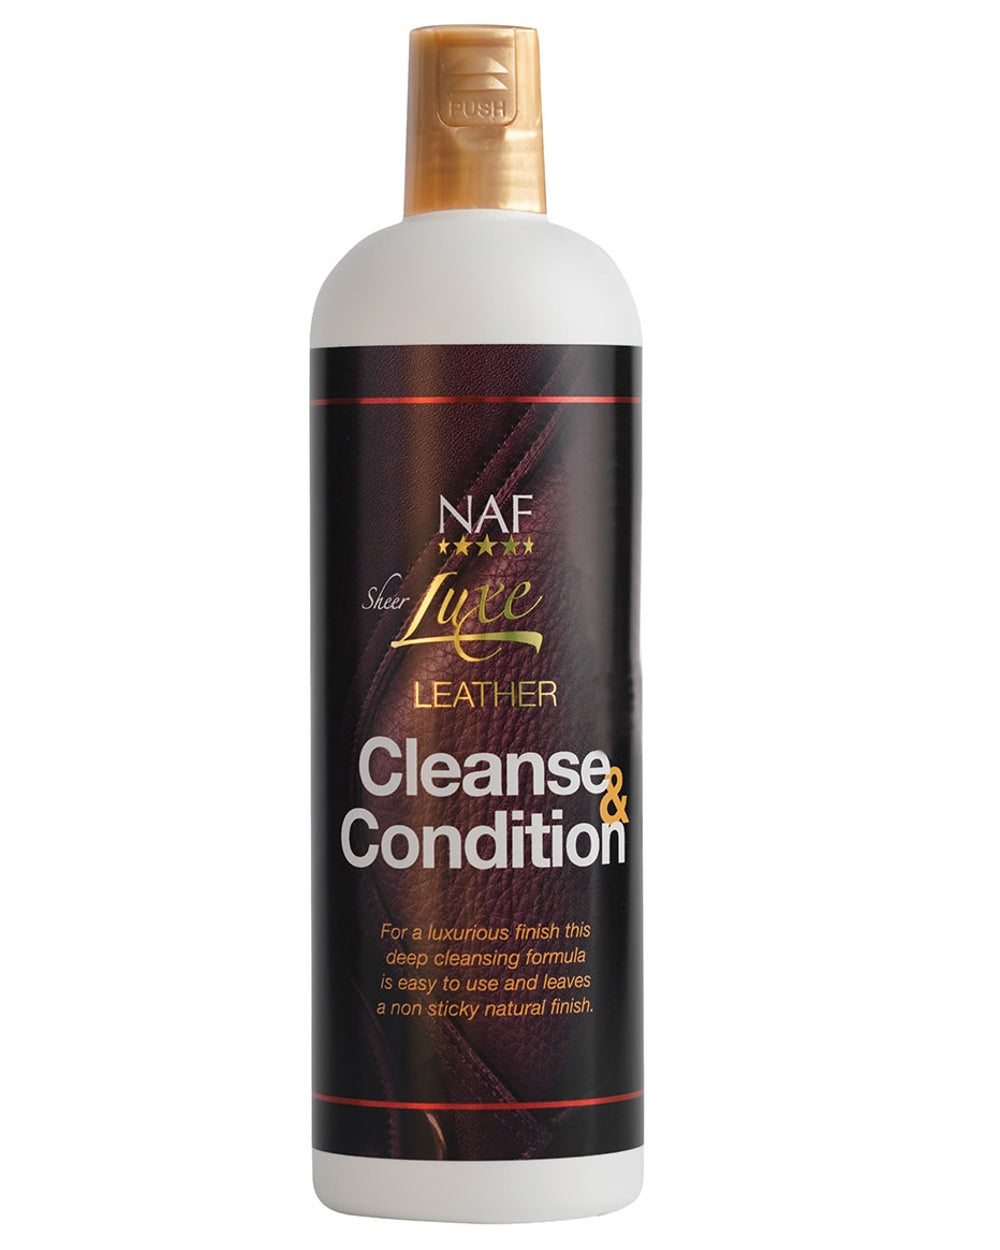 NAF Sheer Luxe Leather Cleanse &amp; Condition 500ml on white background